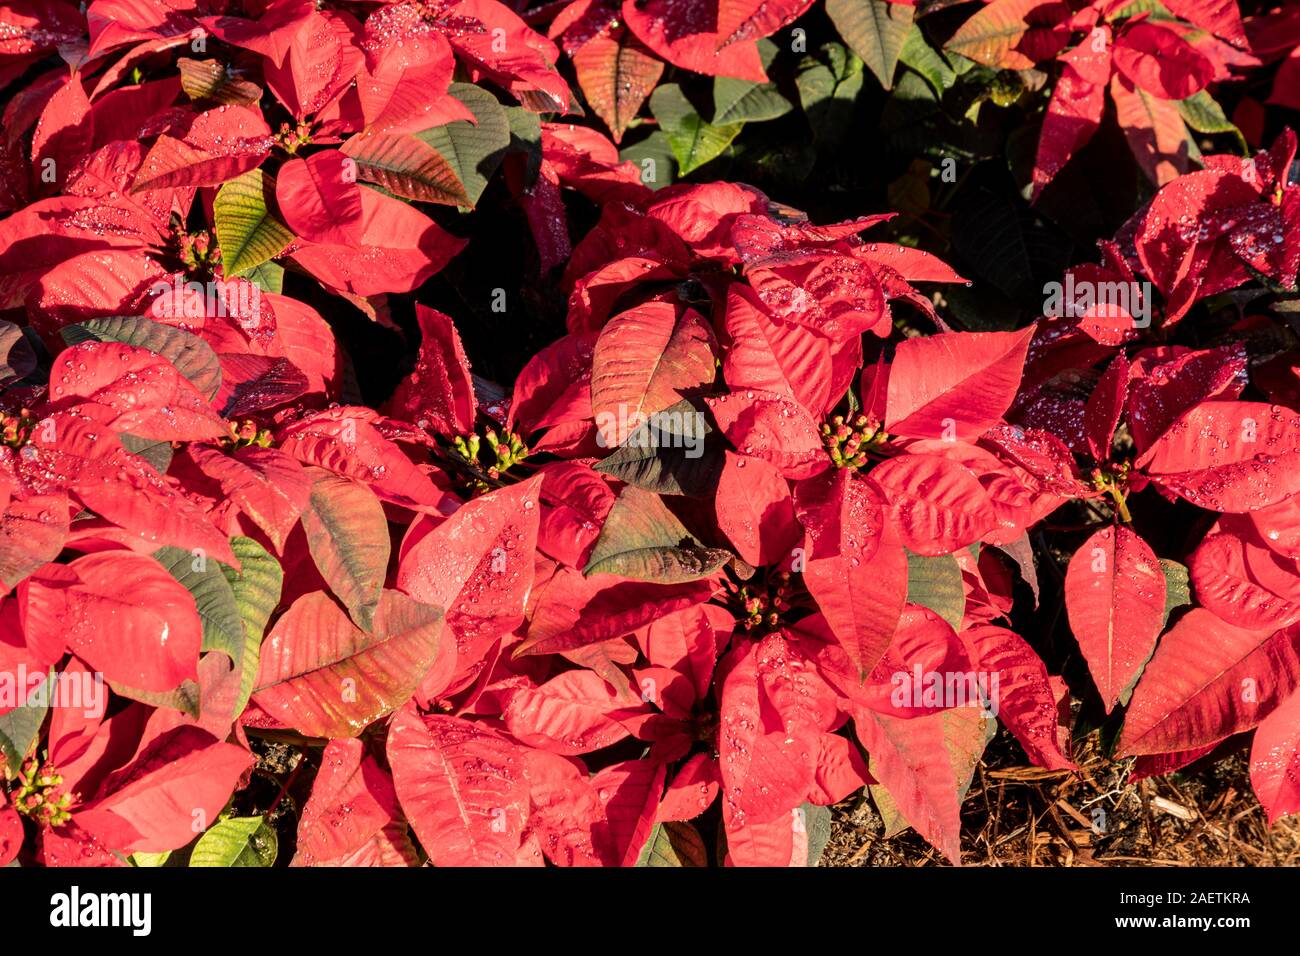 Background of red poinsettia flower plants clustered together at Christmas Stock Photo